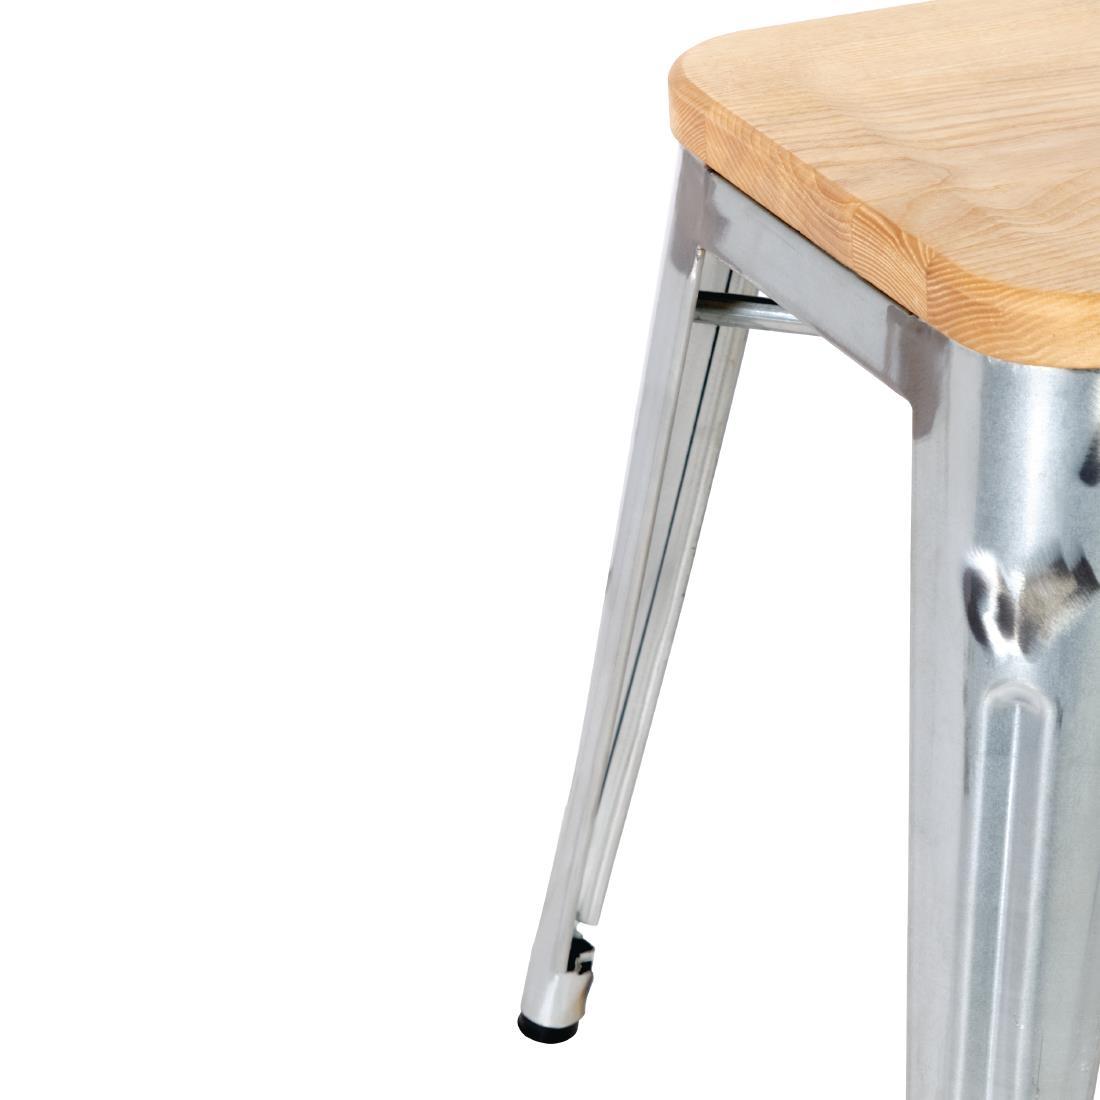 Bolero Bistro Low Stools with Wooden Seat Pad Galvanised Steel (Pack of 4) - GM634  - 3